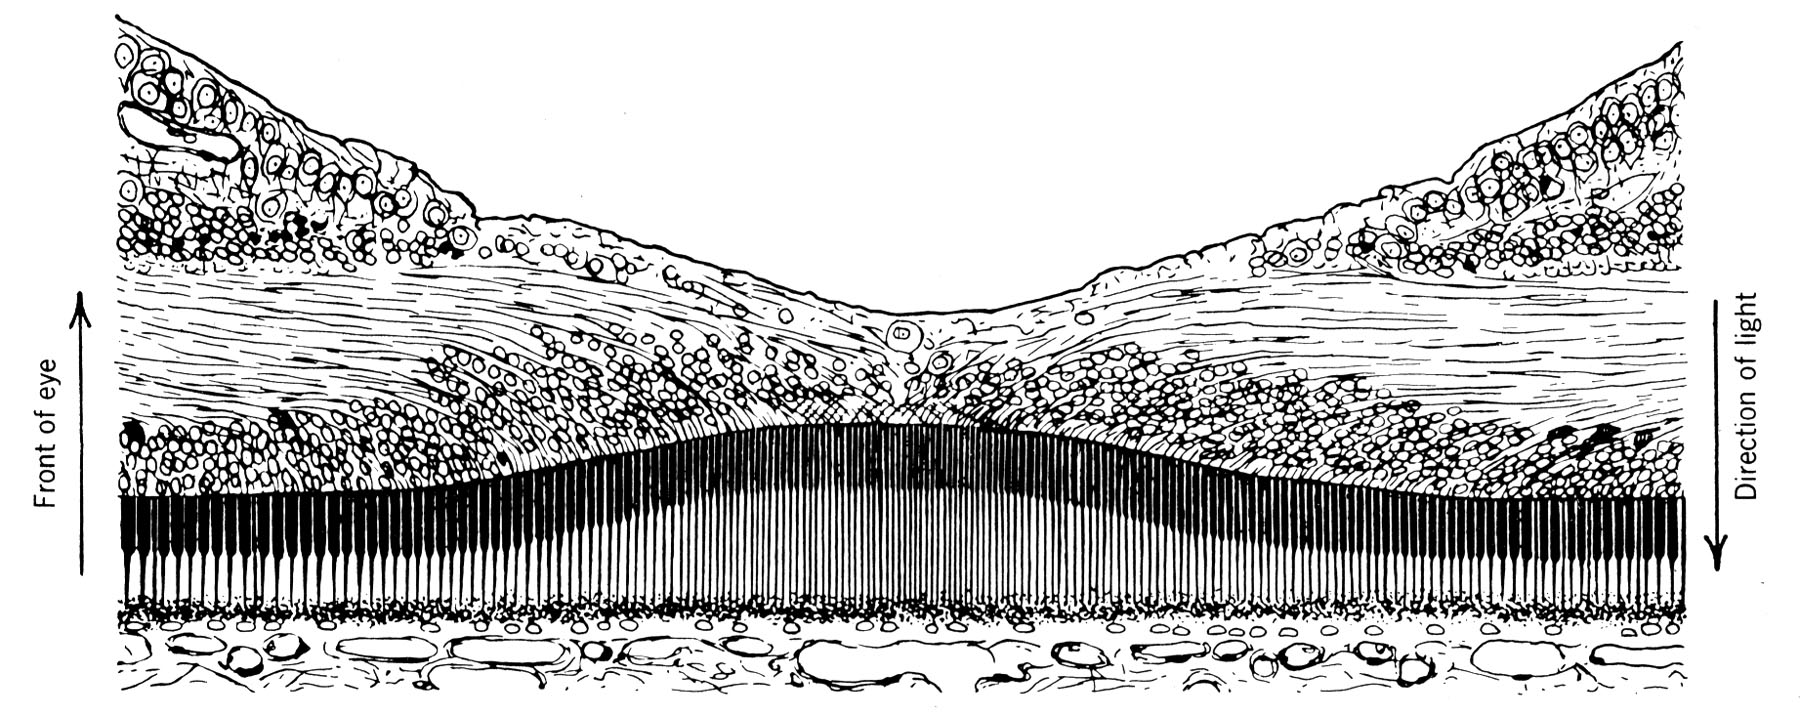 cross section of the fovea